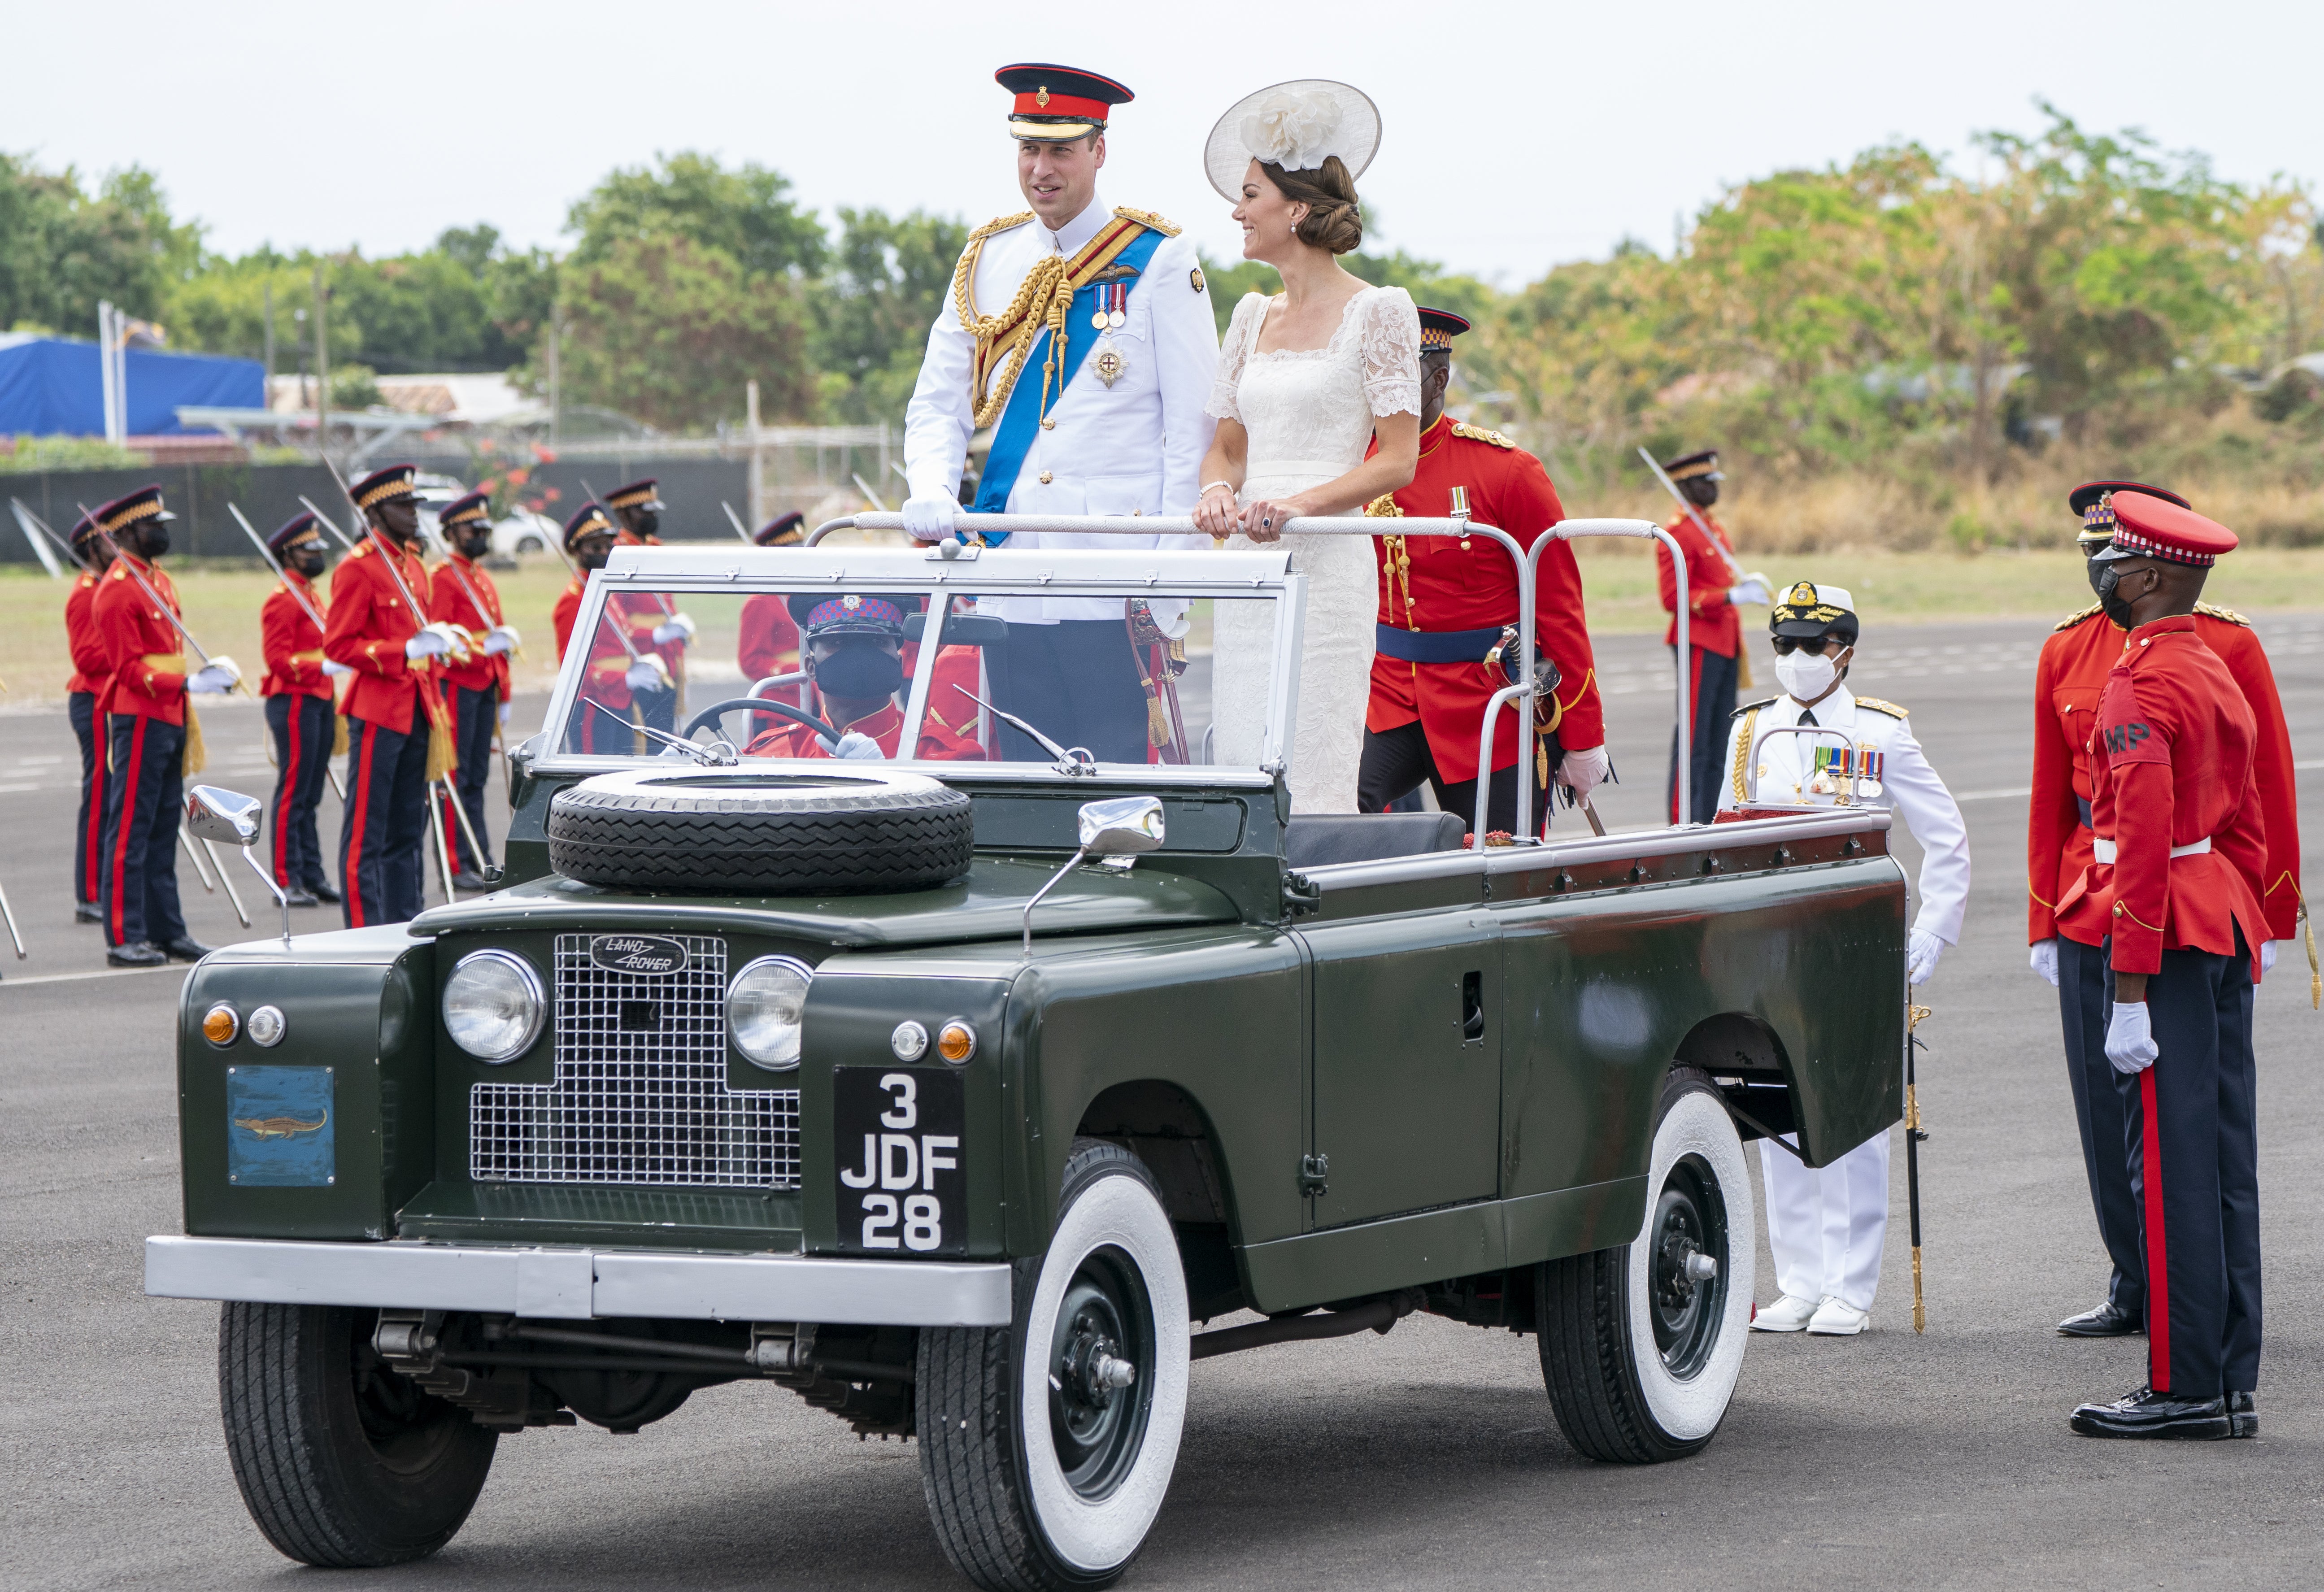 The Duke and Duchess of Cambridge attend the inaugural Commissioning Parade for service personnel from across the Caribbean who have recently completed the Caribbean Military Academy’s Officer Training Programme, in Kingston, Jamaica, on day six of their tour of the Caribbean on behalf of the Queen to mark her Platinum Jubilee. Picture date: Thursday March 24, 2022.